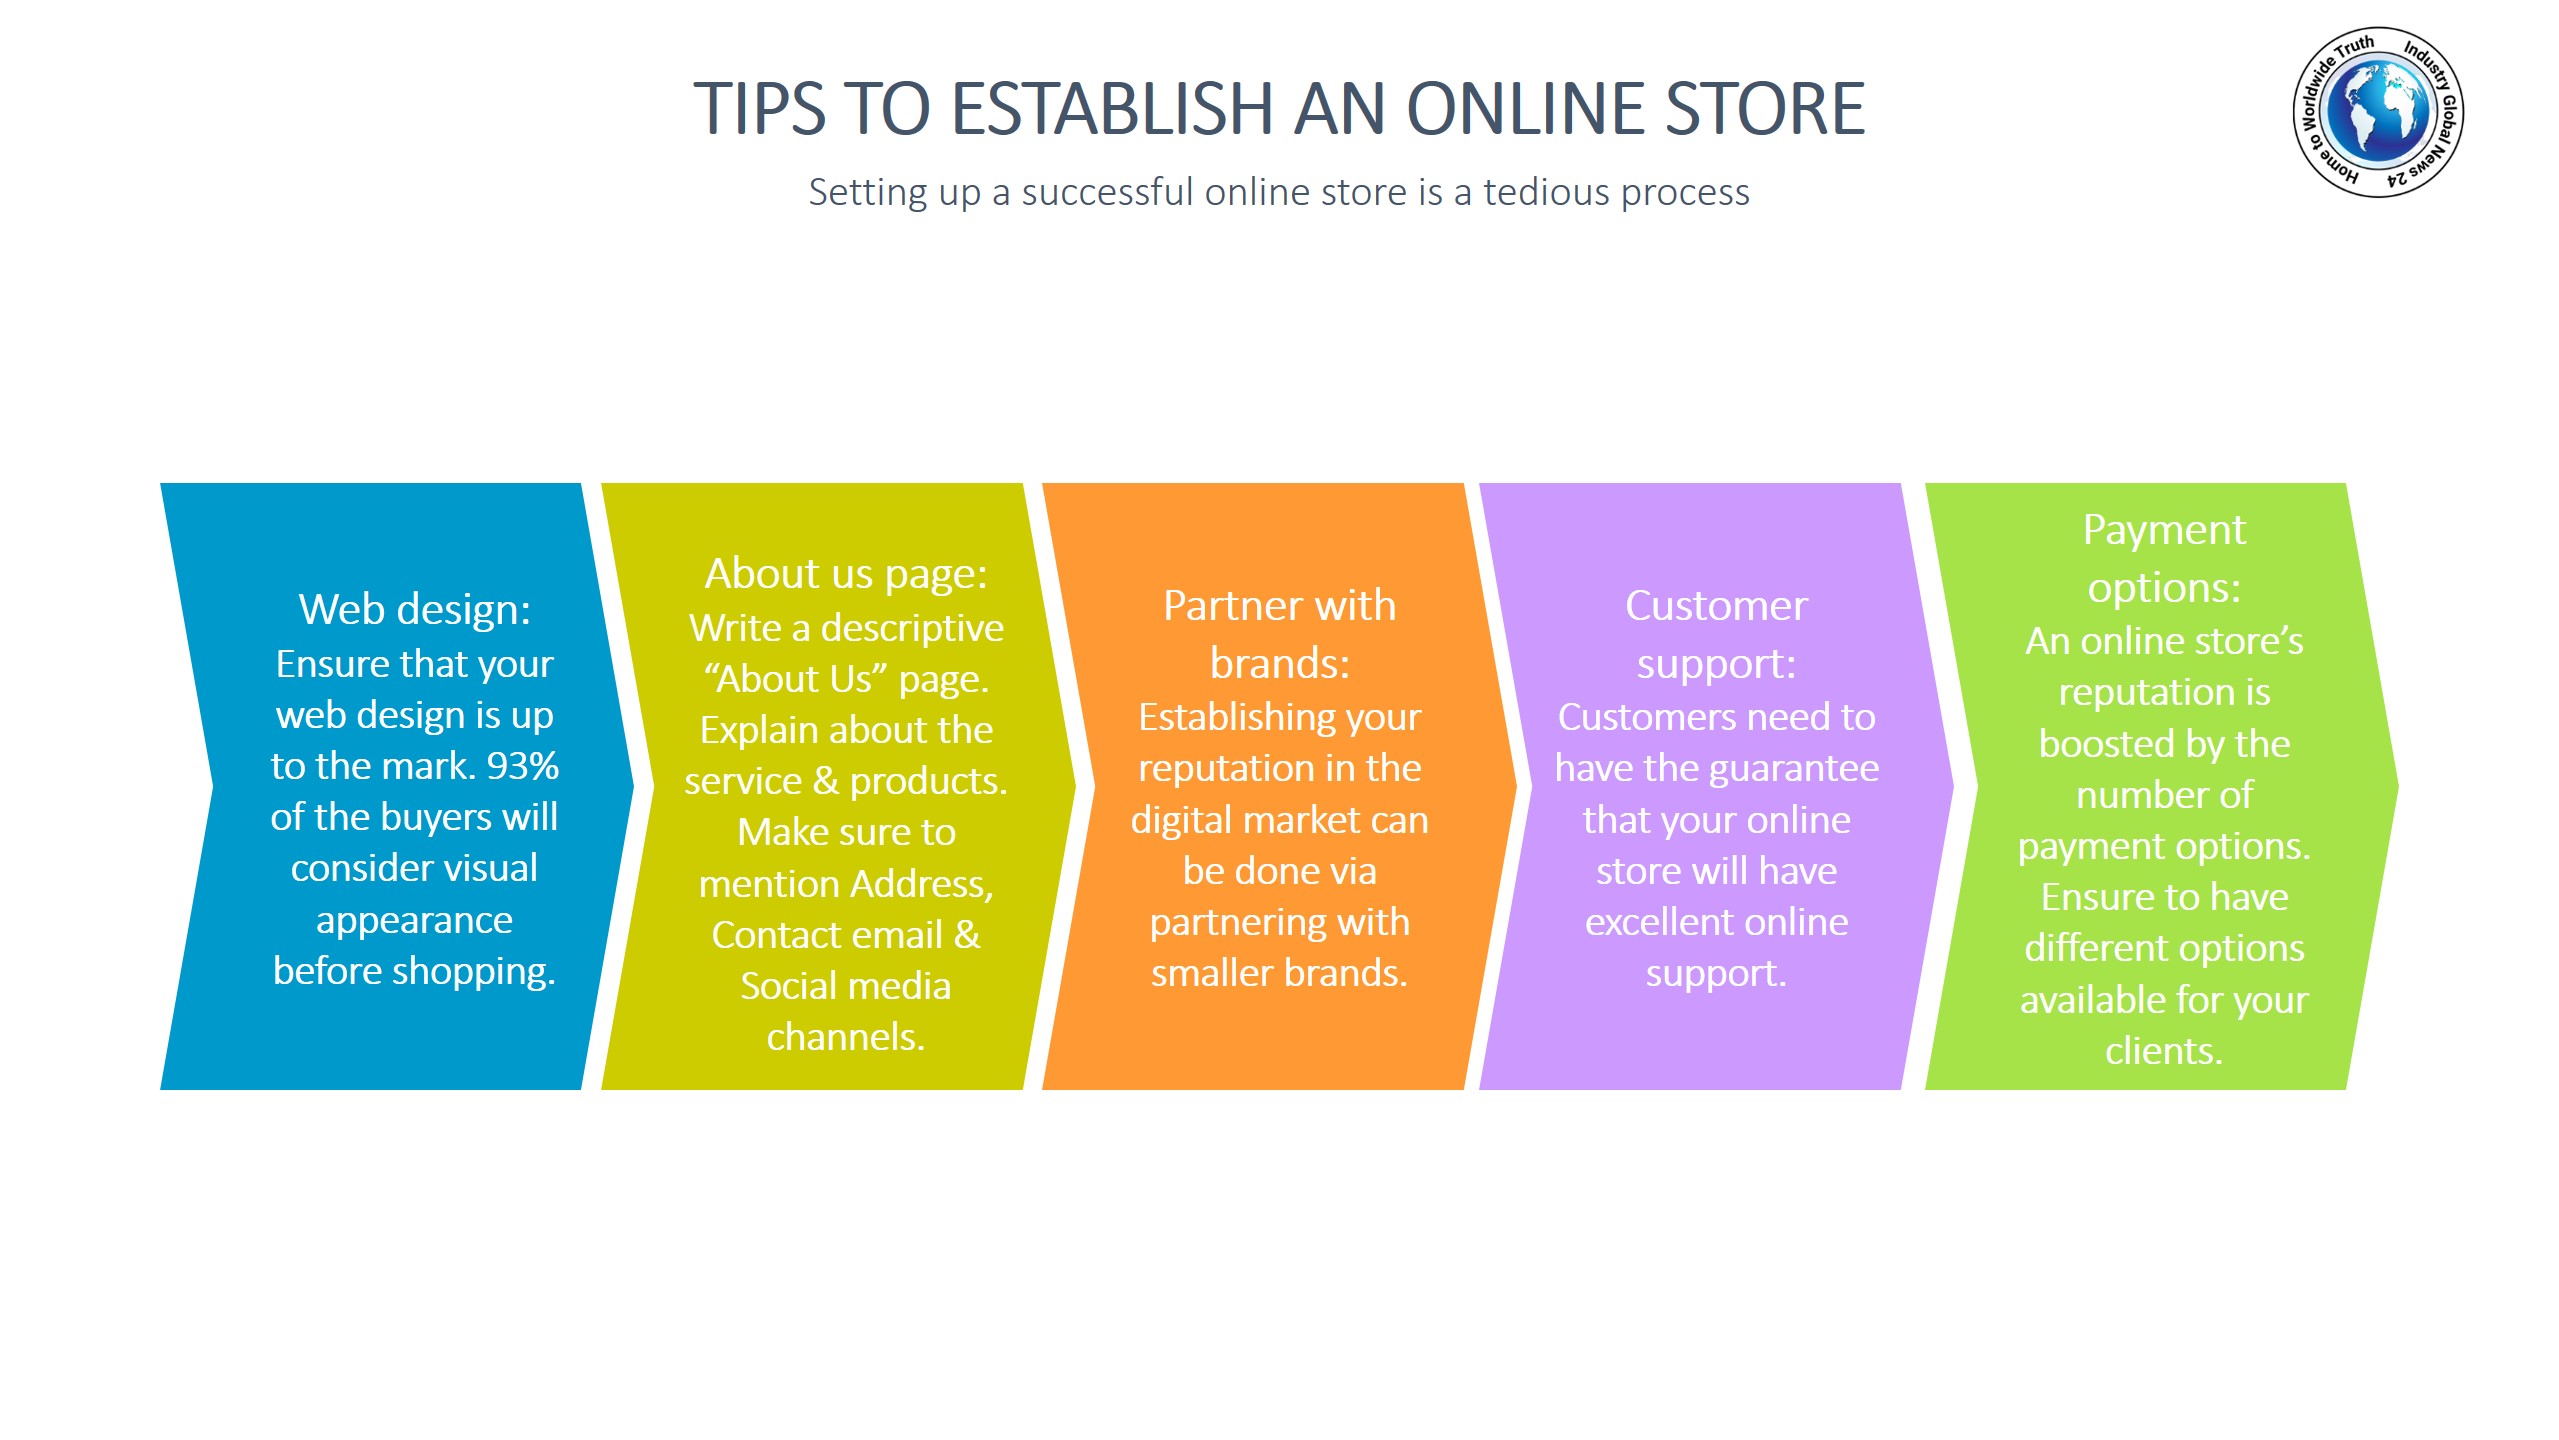 Tips to establish an online store